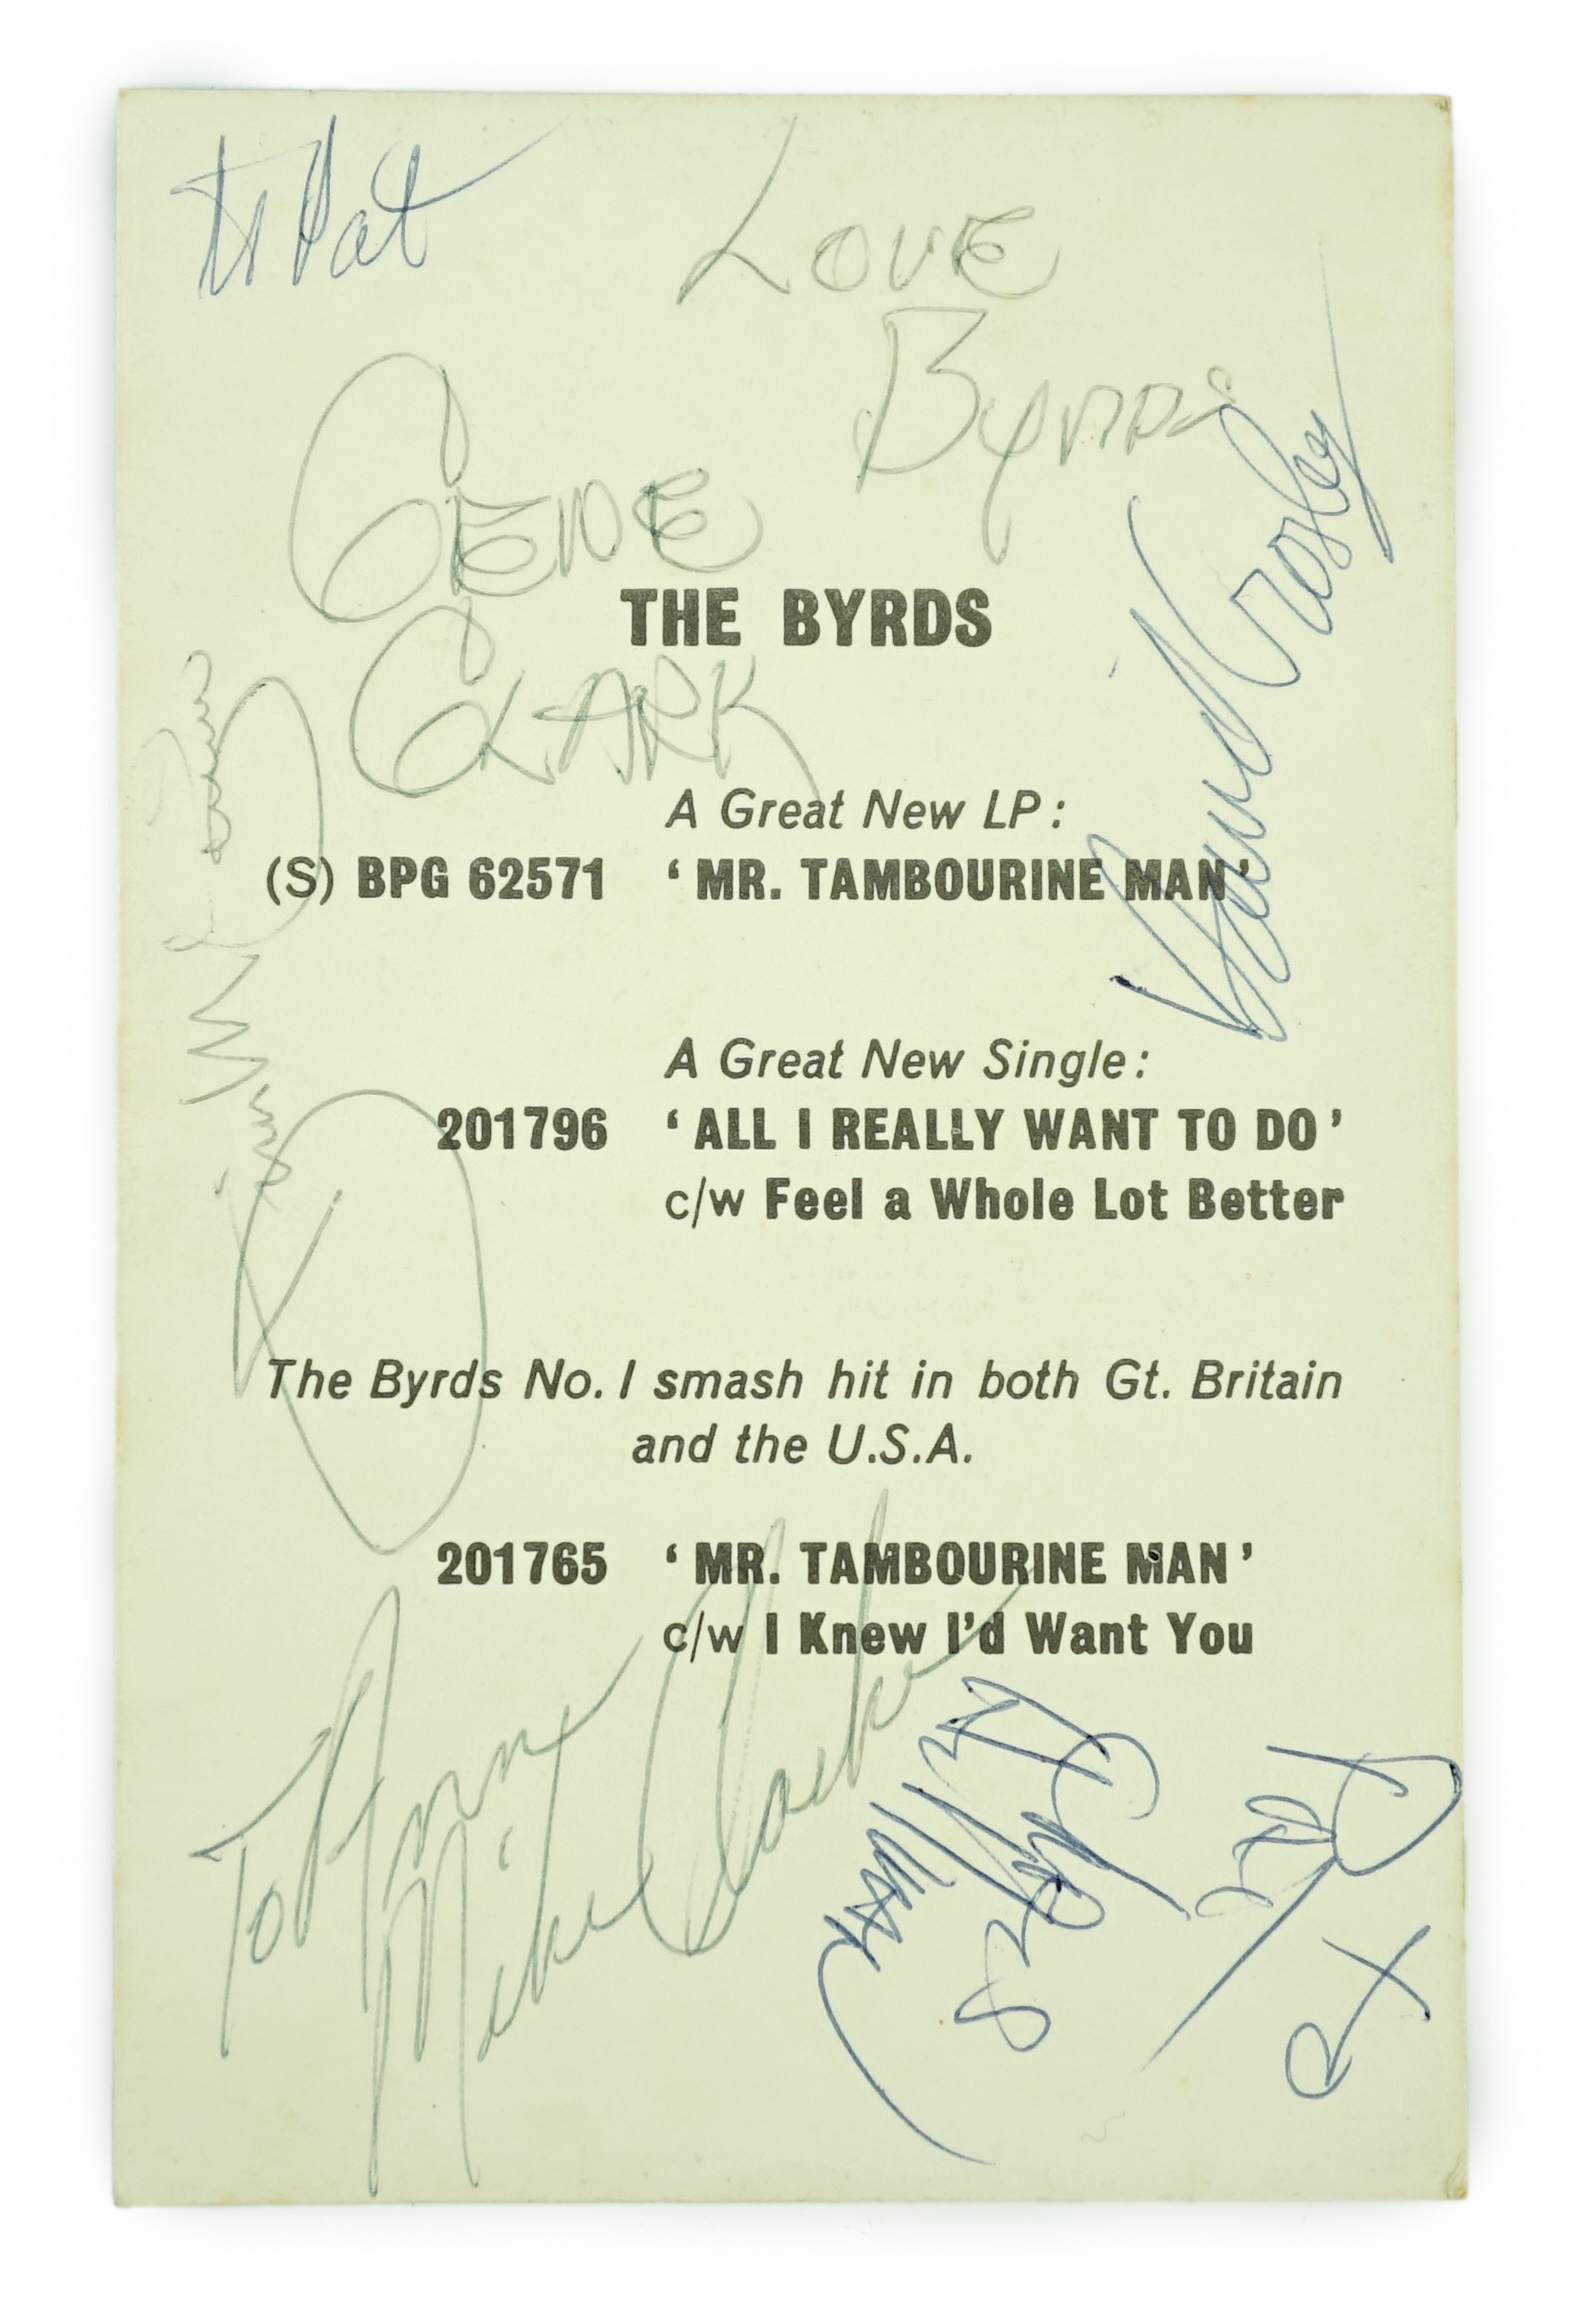 The Byrds promotional postcard signed by band members; Gene Clark, David Crosby, Roger McGuinn, Mike Clarke and Chris Hillman, with dedication ‘To Pat’ and ‘To Ann’, promoting their latest LP and single, the signatures w